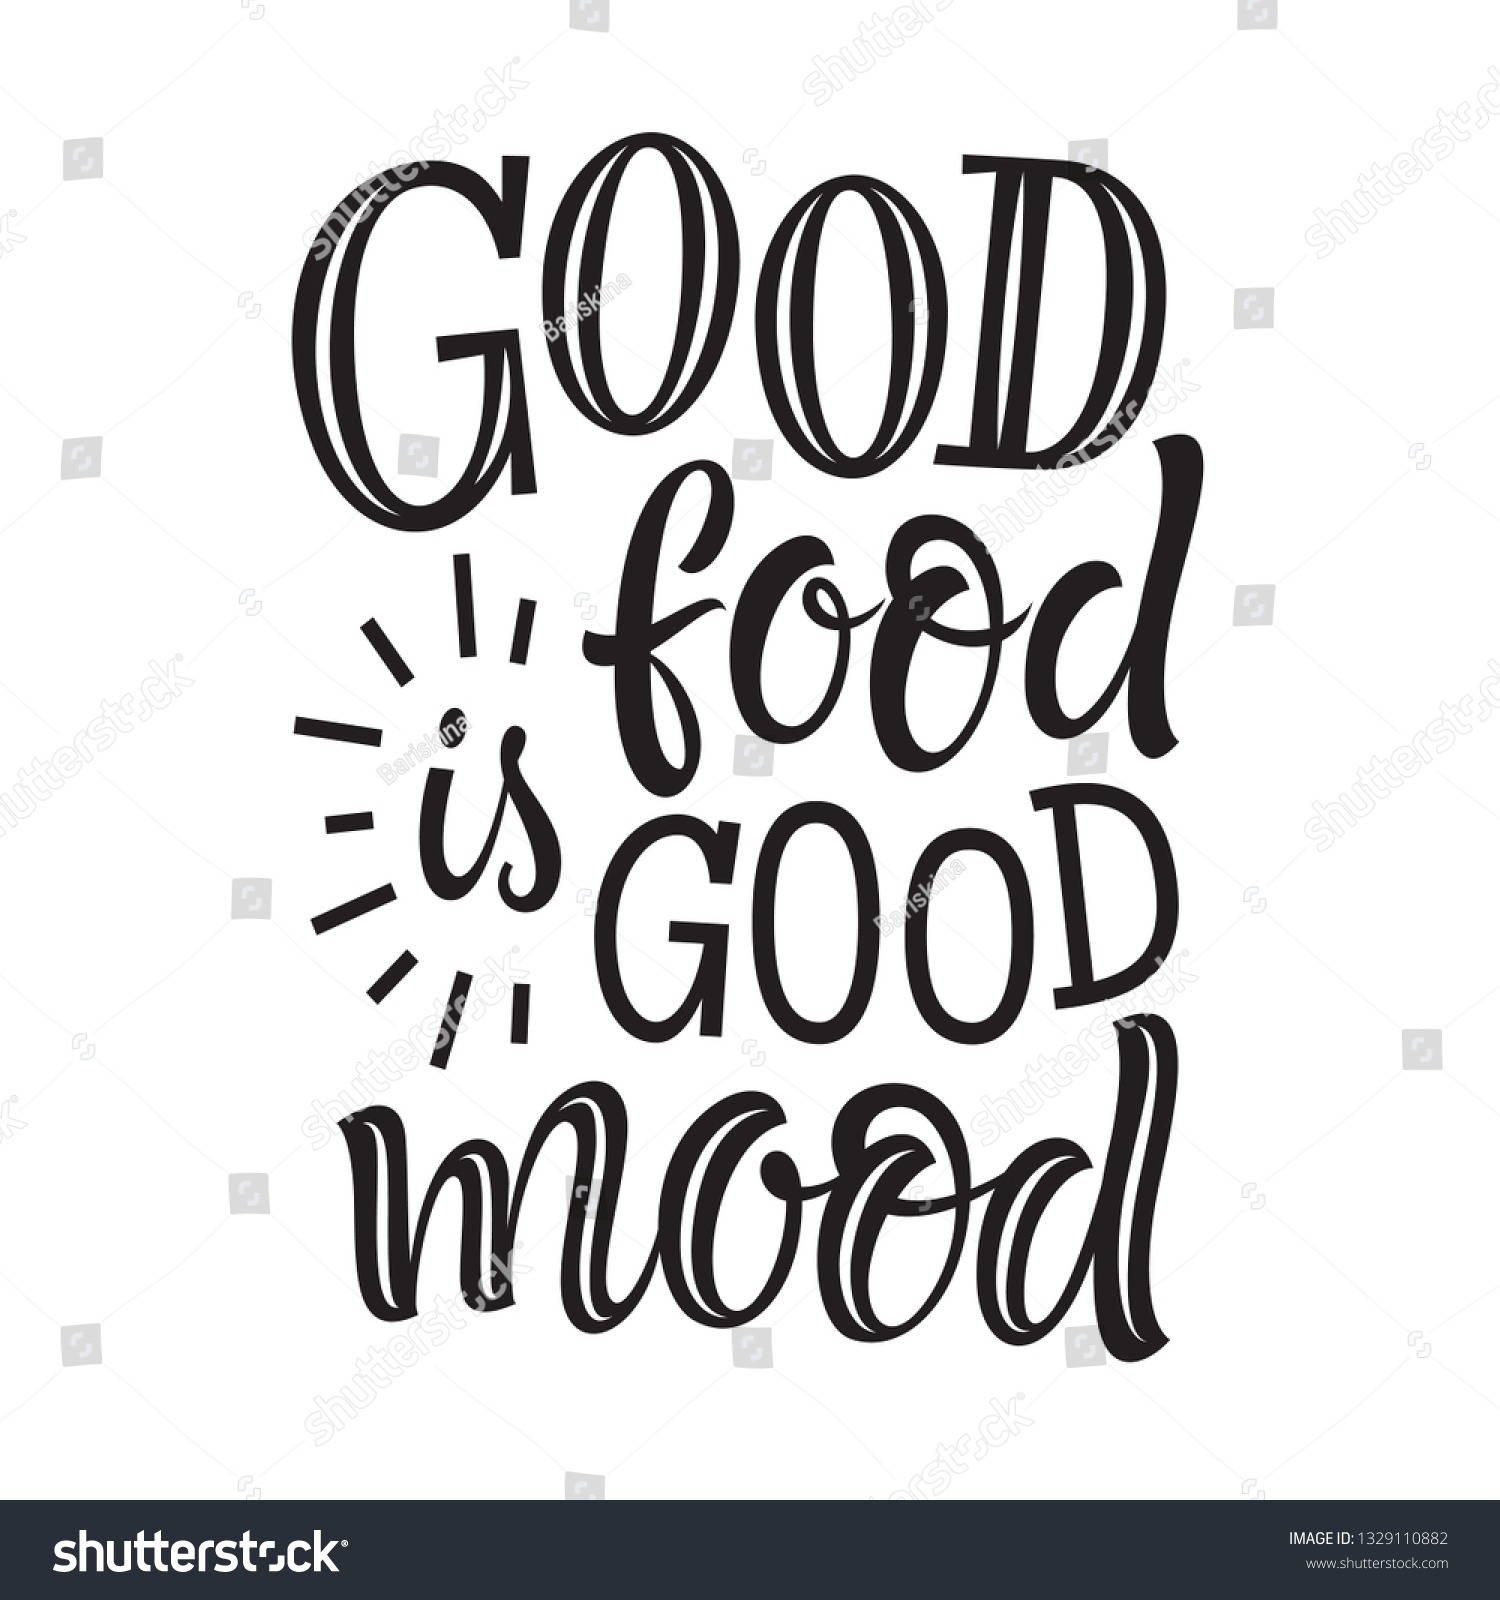 SVG of Vector illustration of hand drawn lettering phrase. Good food is good mood. Graphic design for restaurant, cafe, farm, market, menu and recipes. Unique typographic elements for labels, cards, prints svg